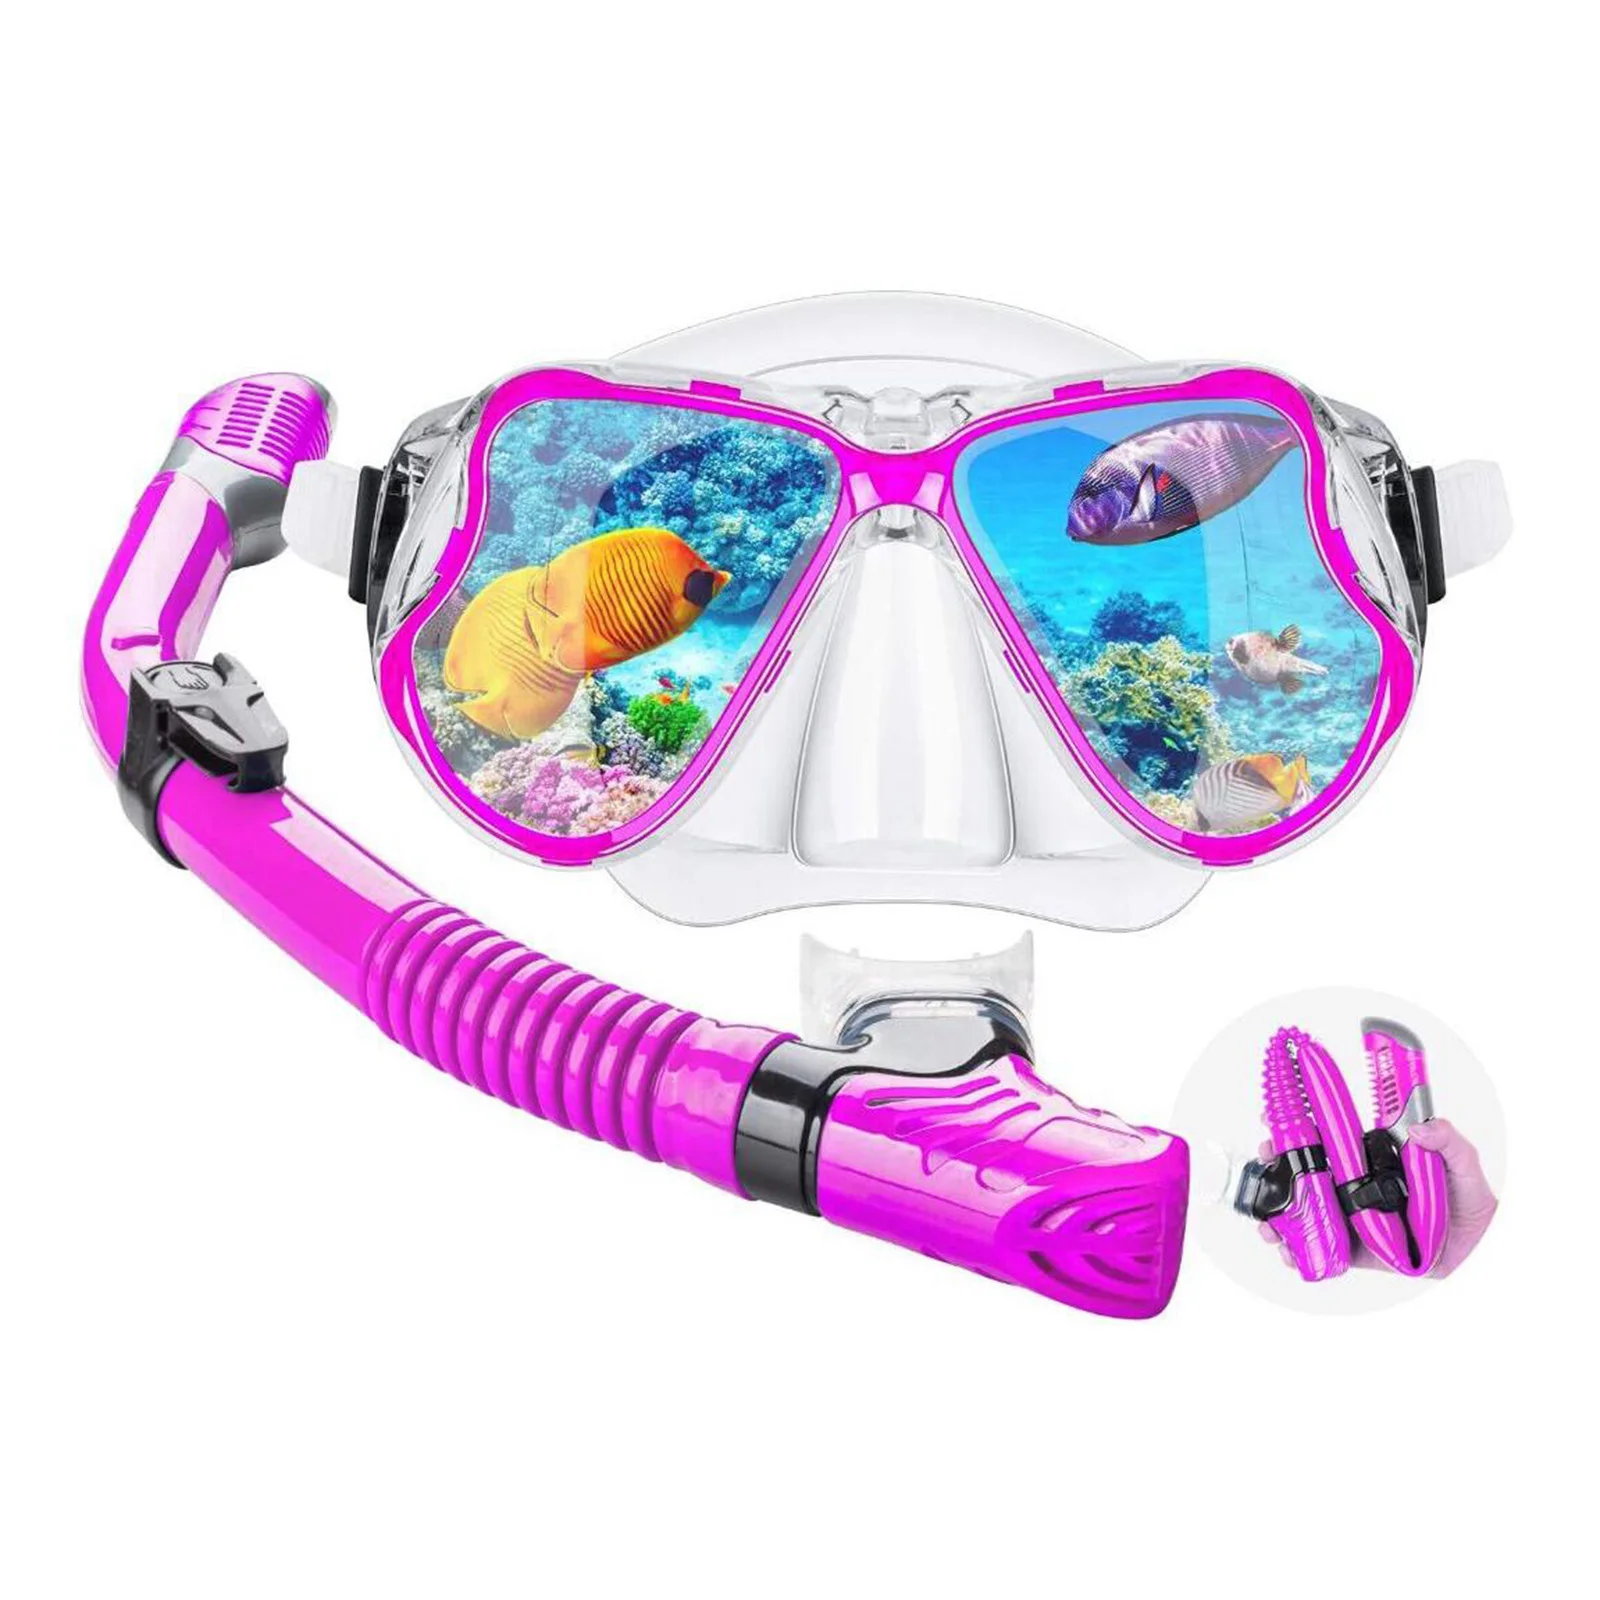 Dry Snorkel Gear Snorkeling Diving Equipment Anti-Fog Dive Mask Snorkel Goggles Scuba Diving Freediving Spearfishing Swimming